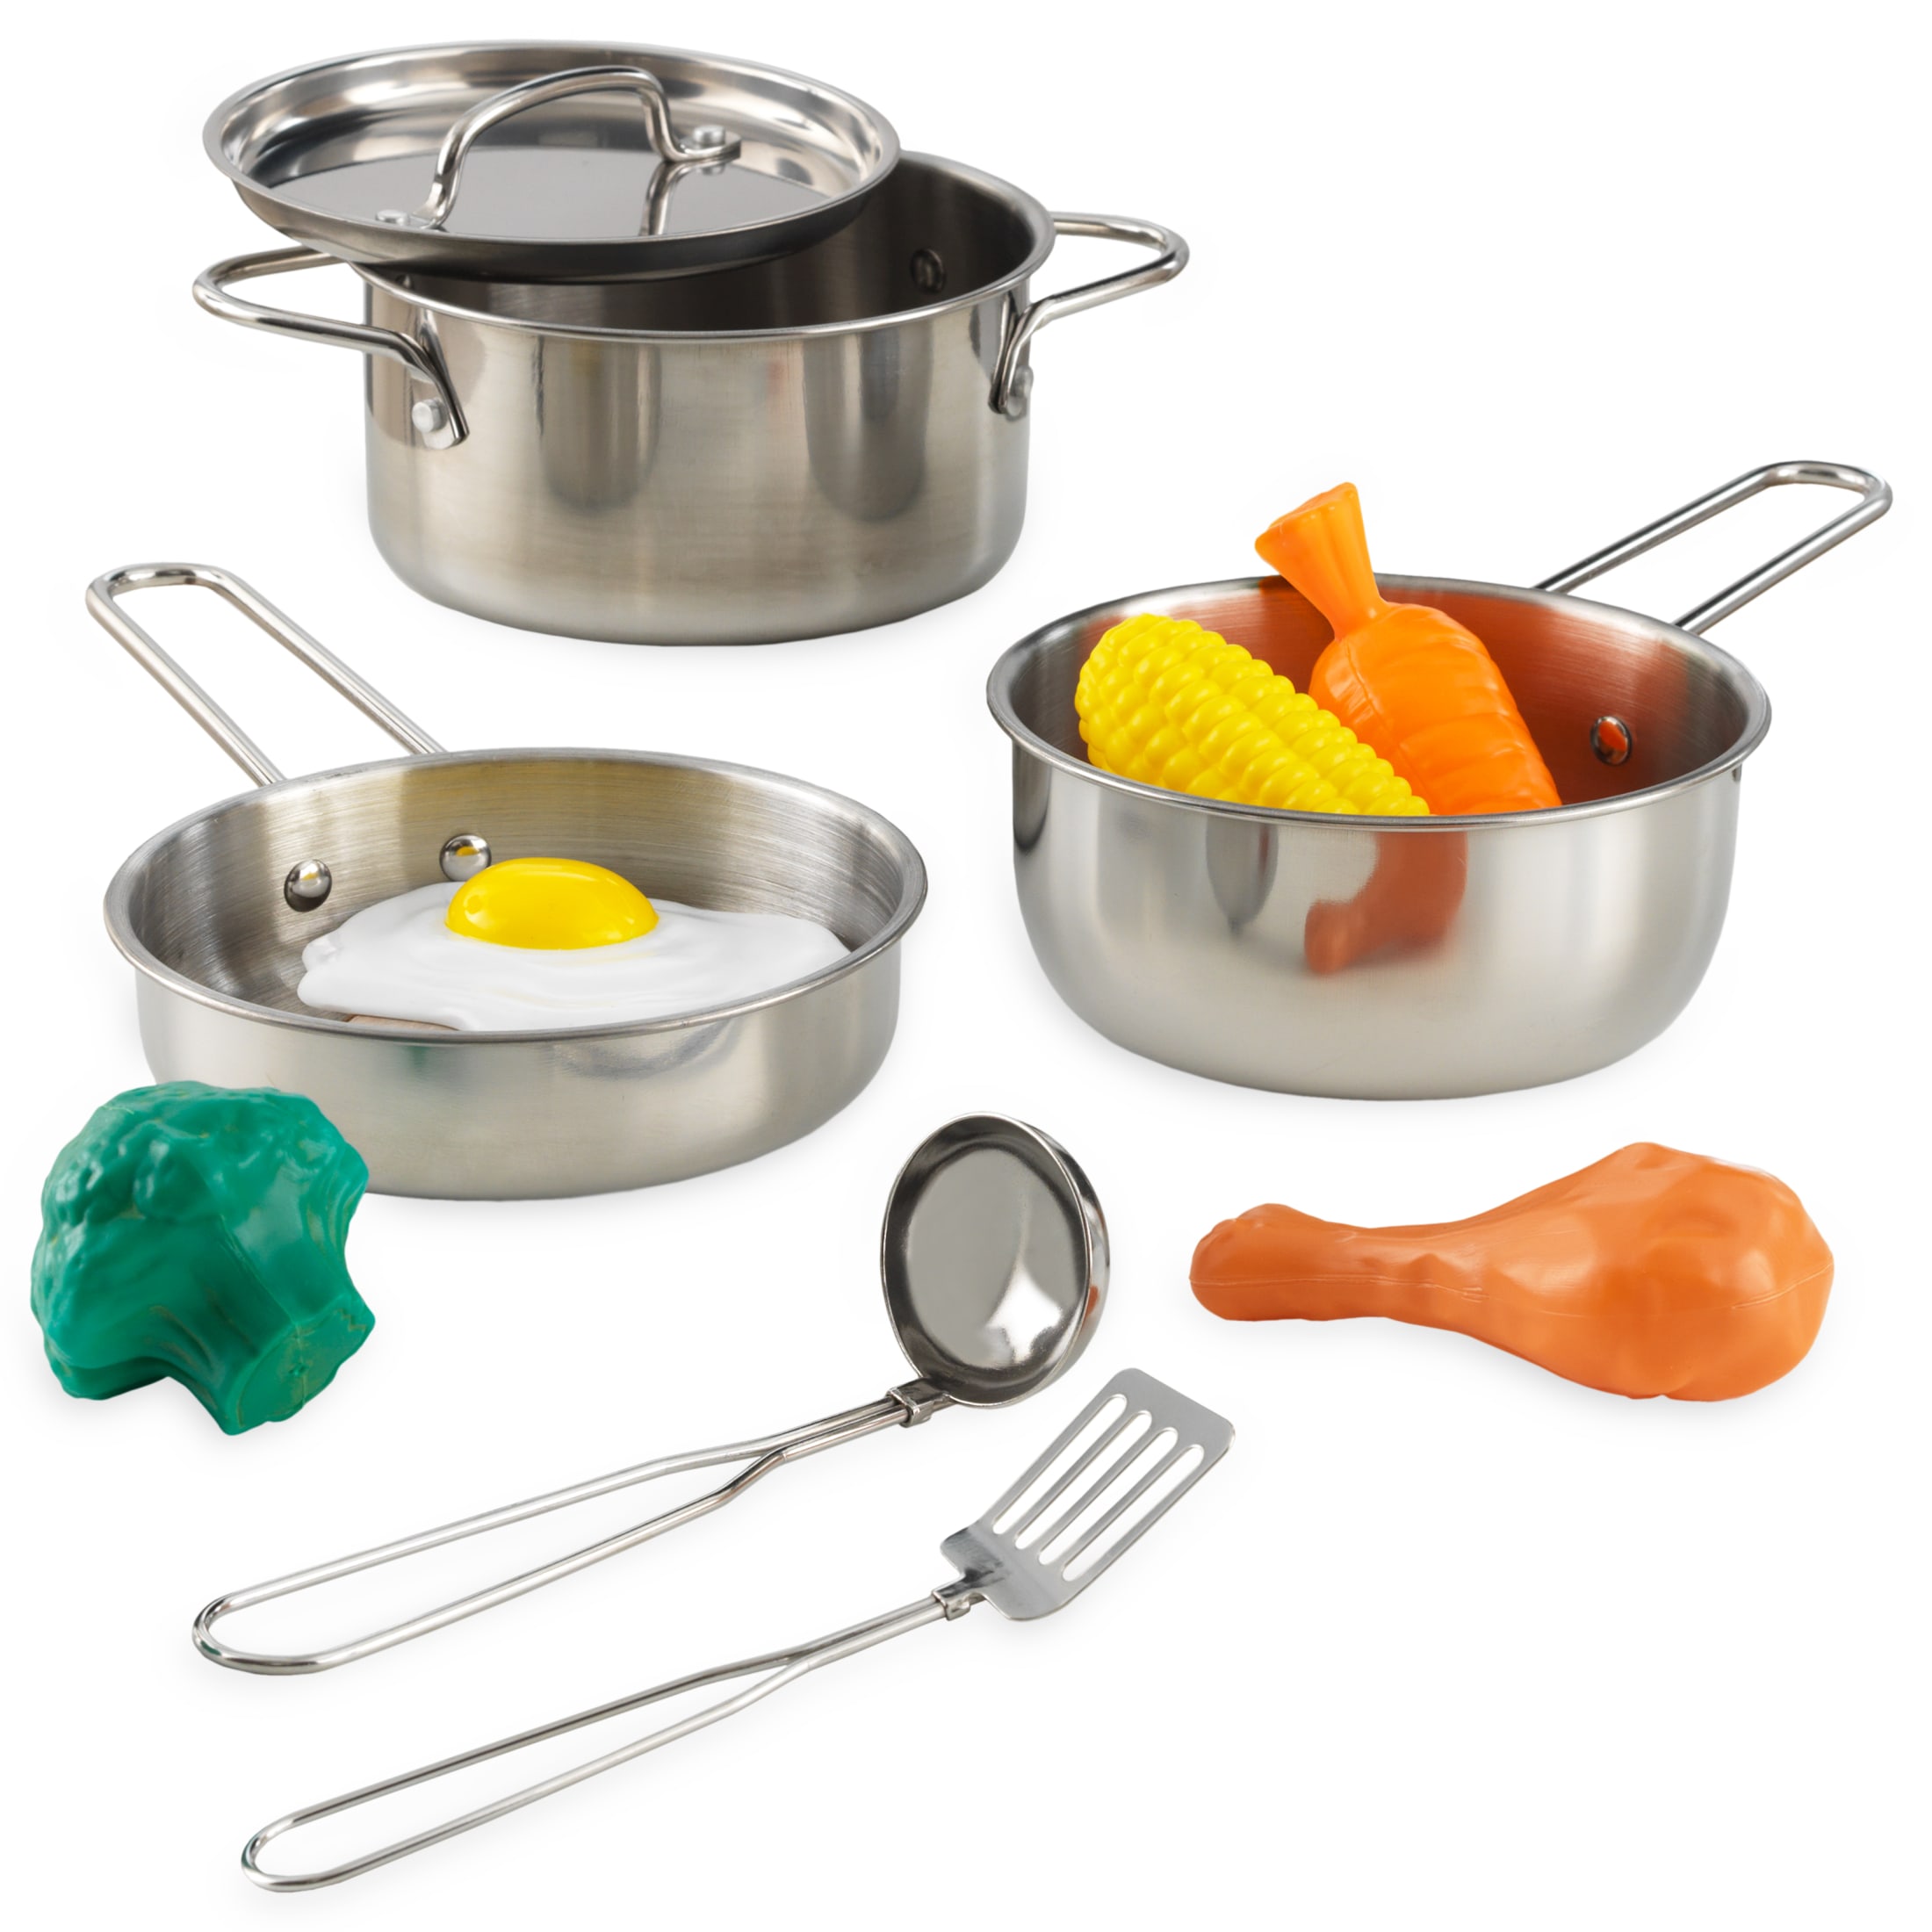 KidKraft Deluxe Cookware Metal Play Set with 11 Pieces of Play Food - image 1 of 5